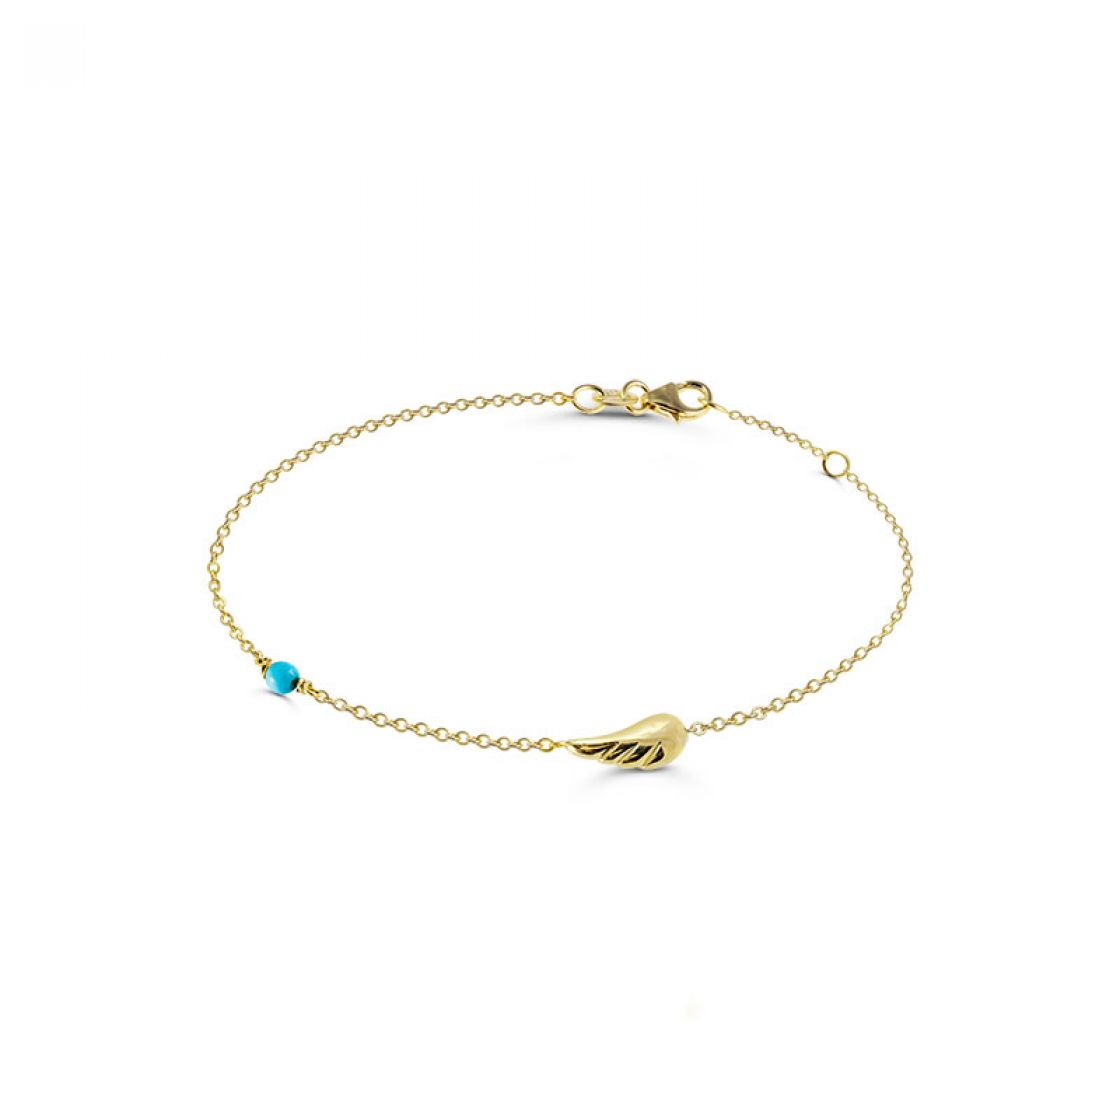 Cute and elegant gold chain bracelet with an angel wing and a small turquoise stone that brings good luck.